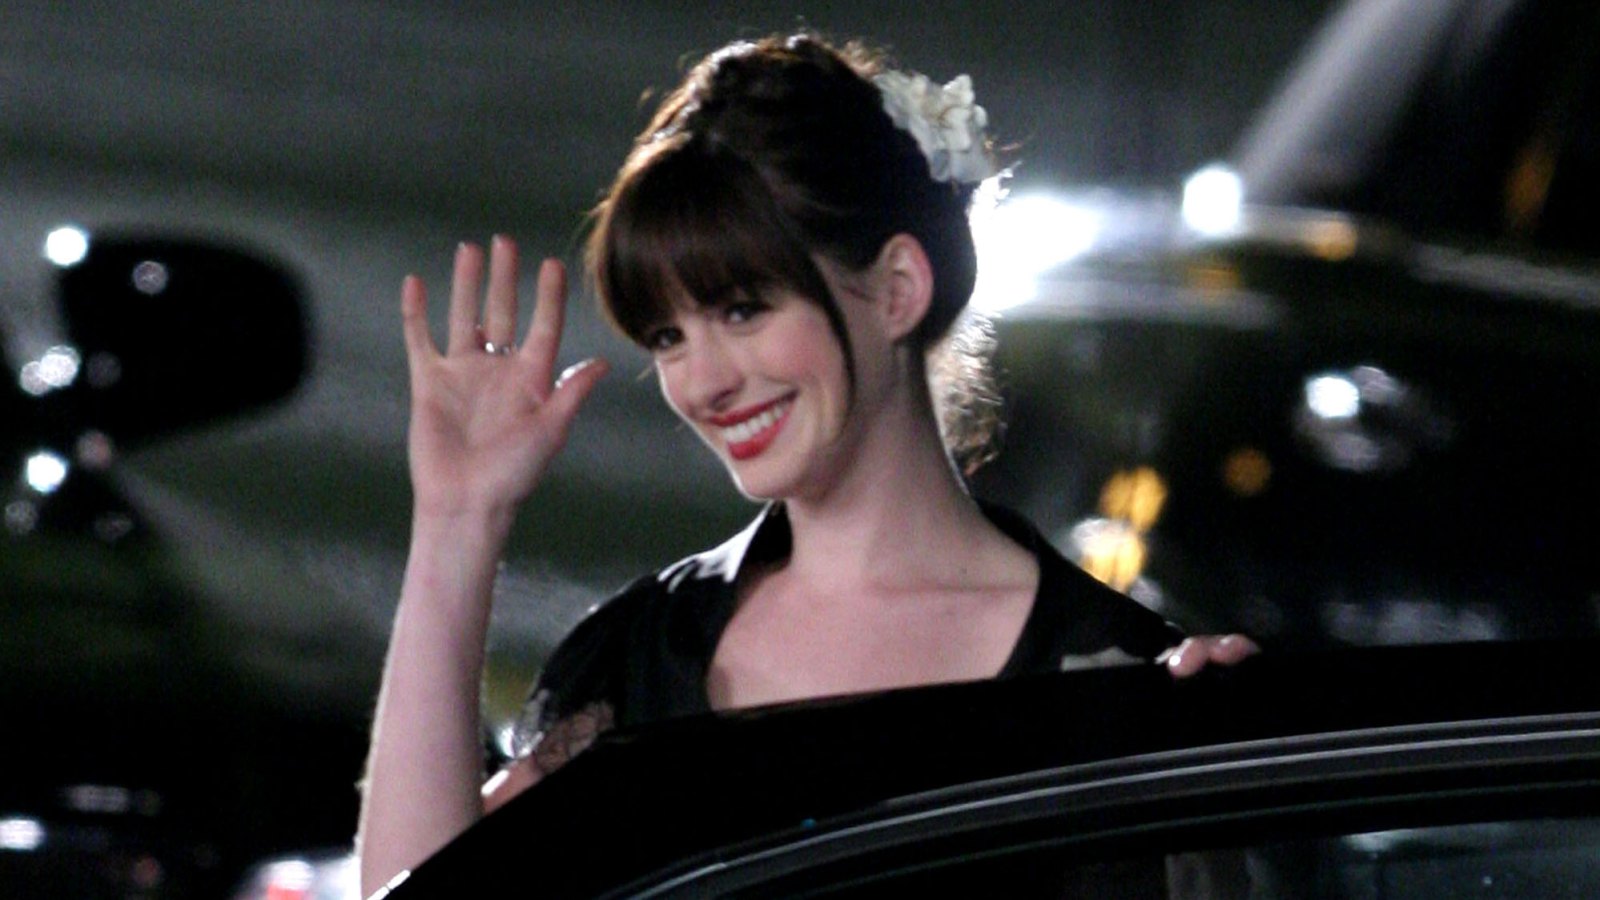 Anne Hathaway during Anne Hathaway on Location for The Devil Wears Prada - October 26, 2005 at The Museum of Natural History in New York City, New York, United States. (Photo by James Devaney/WireImage)